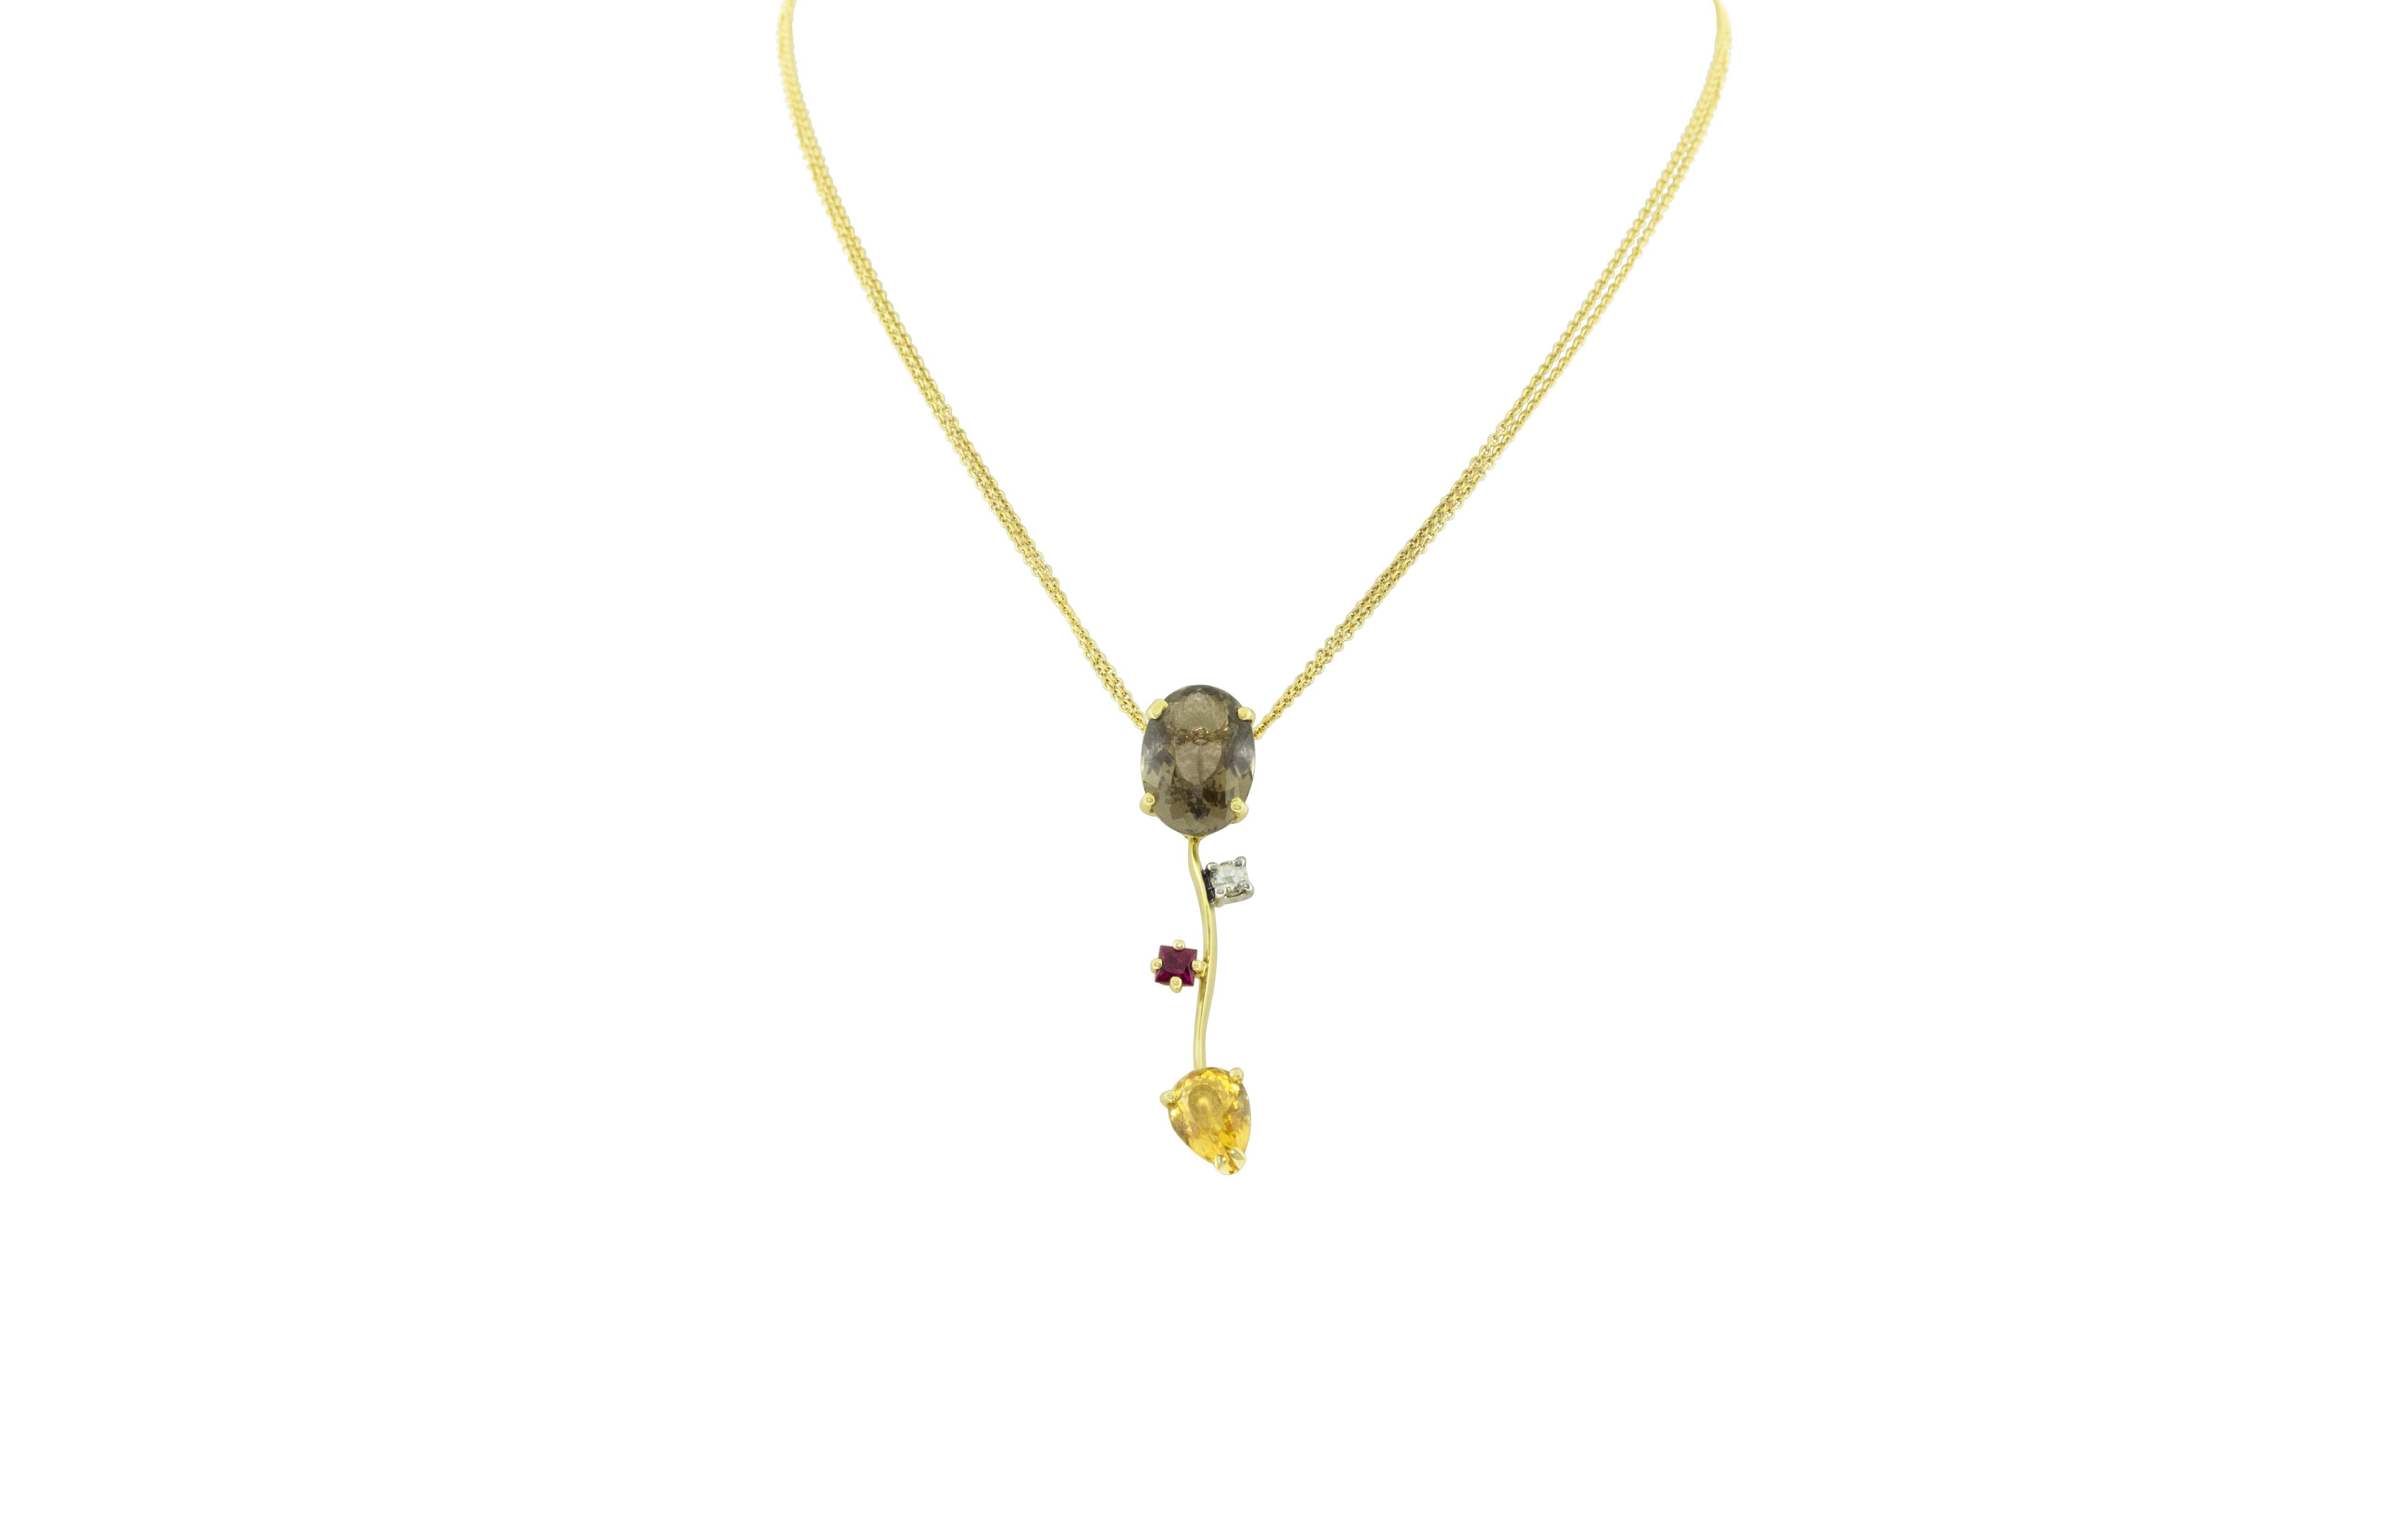 18K yellow gold Ponte Vecchio Gioielli pendant necklace featuring 6.85 carats of quartz, 0.22 carats of rubies, 0.10 carats of round brilliant cut diamonds and adjustable lobster clasp closure. 8.5 grams total weight of 18K gold. Made in Italy.